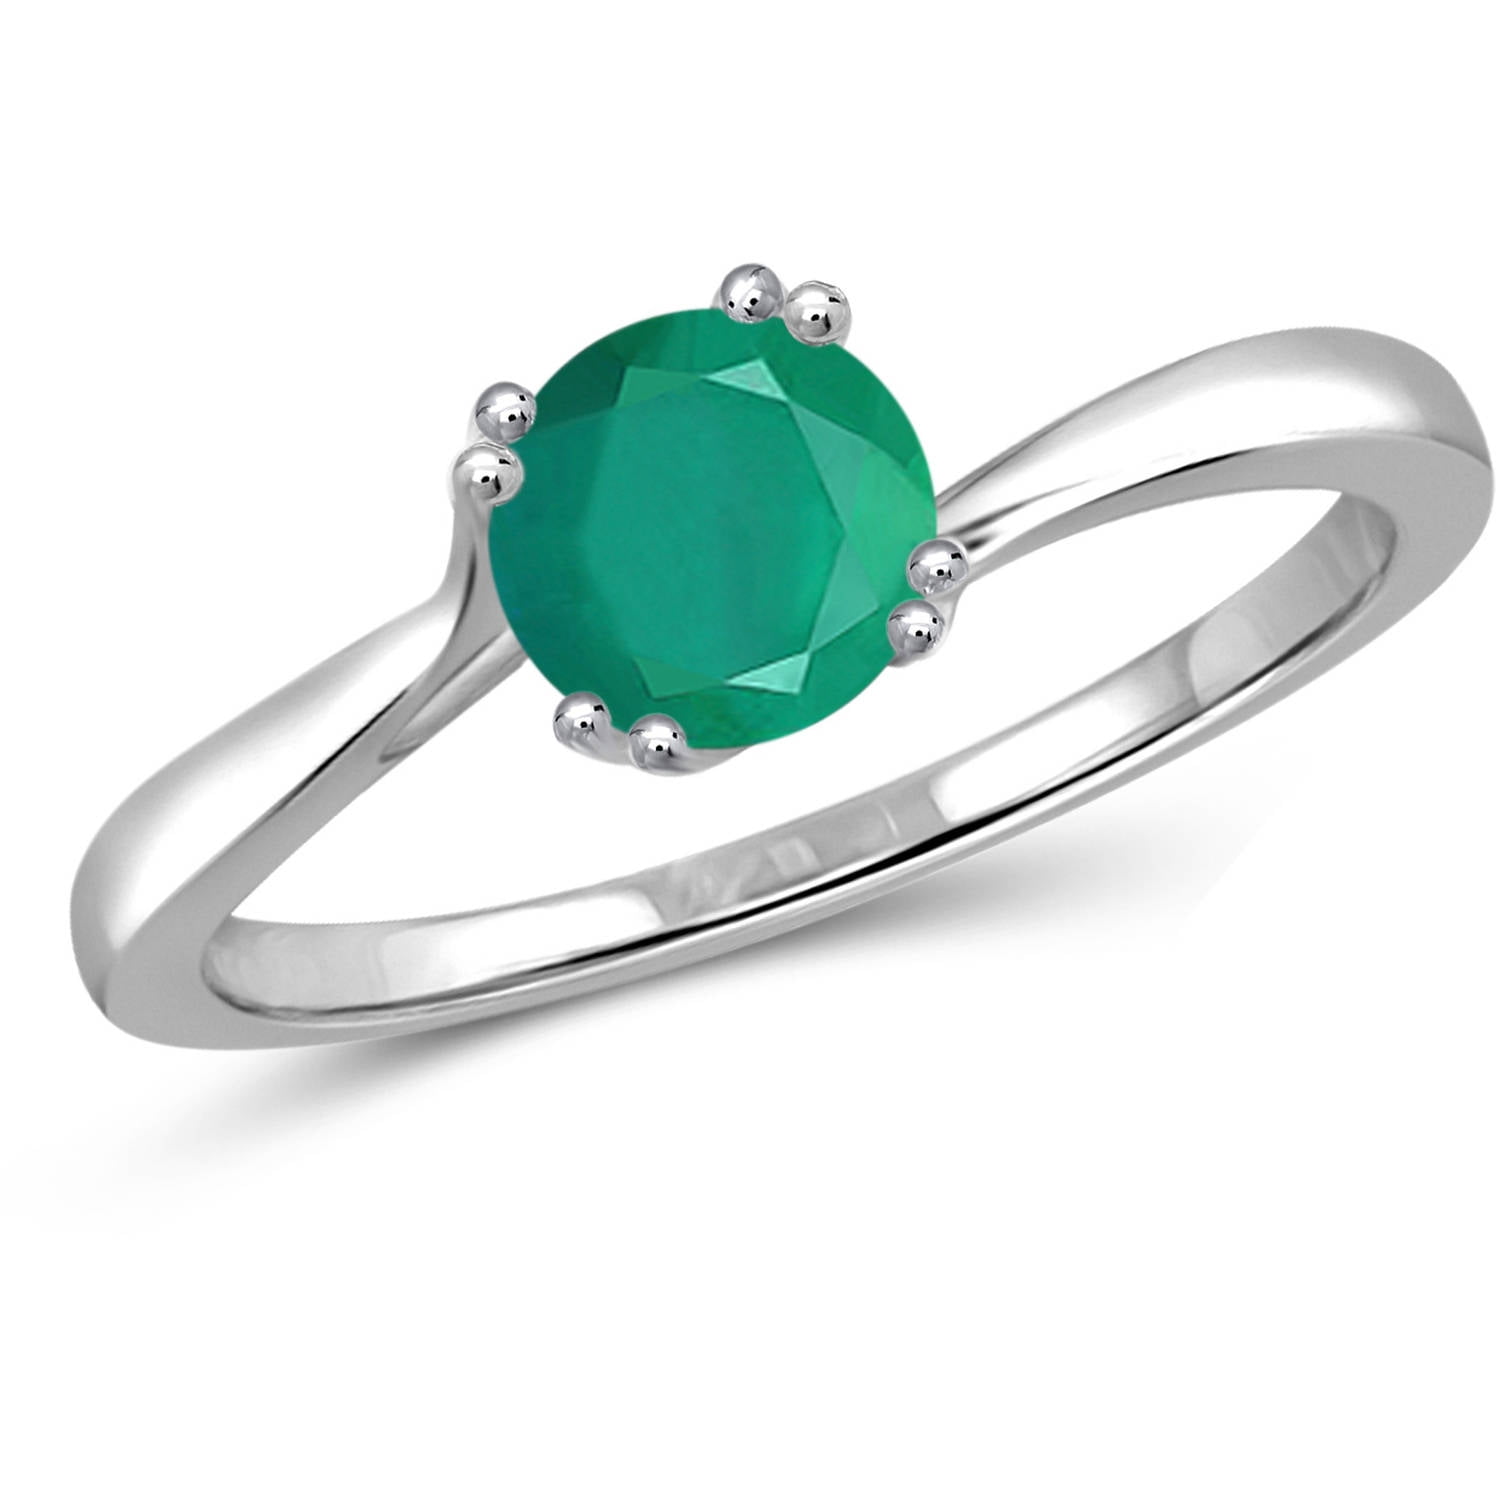 FS 5*7 Natural High-quality Emerald Ring Real S925 Sterling Silver With  Certificate Fine Charm Wedding Jewelry for Women MeiBaPJ - AliExpress